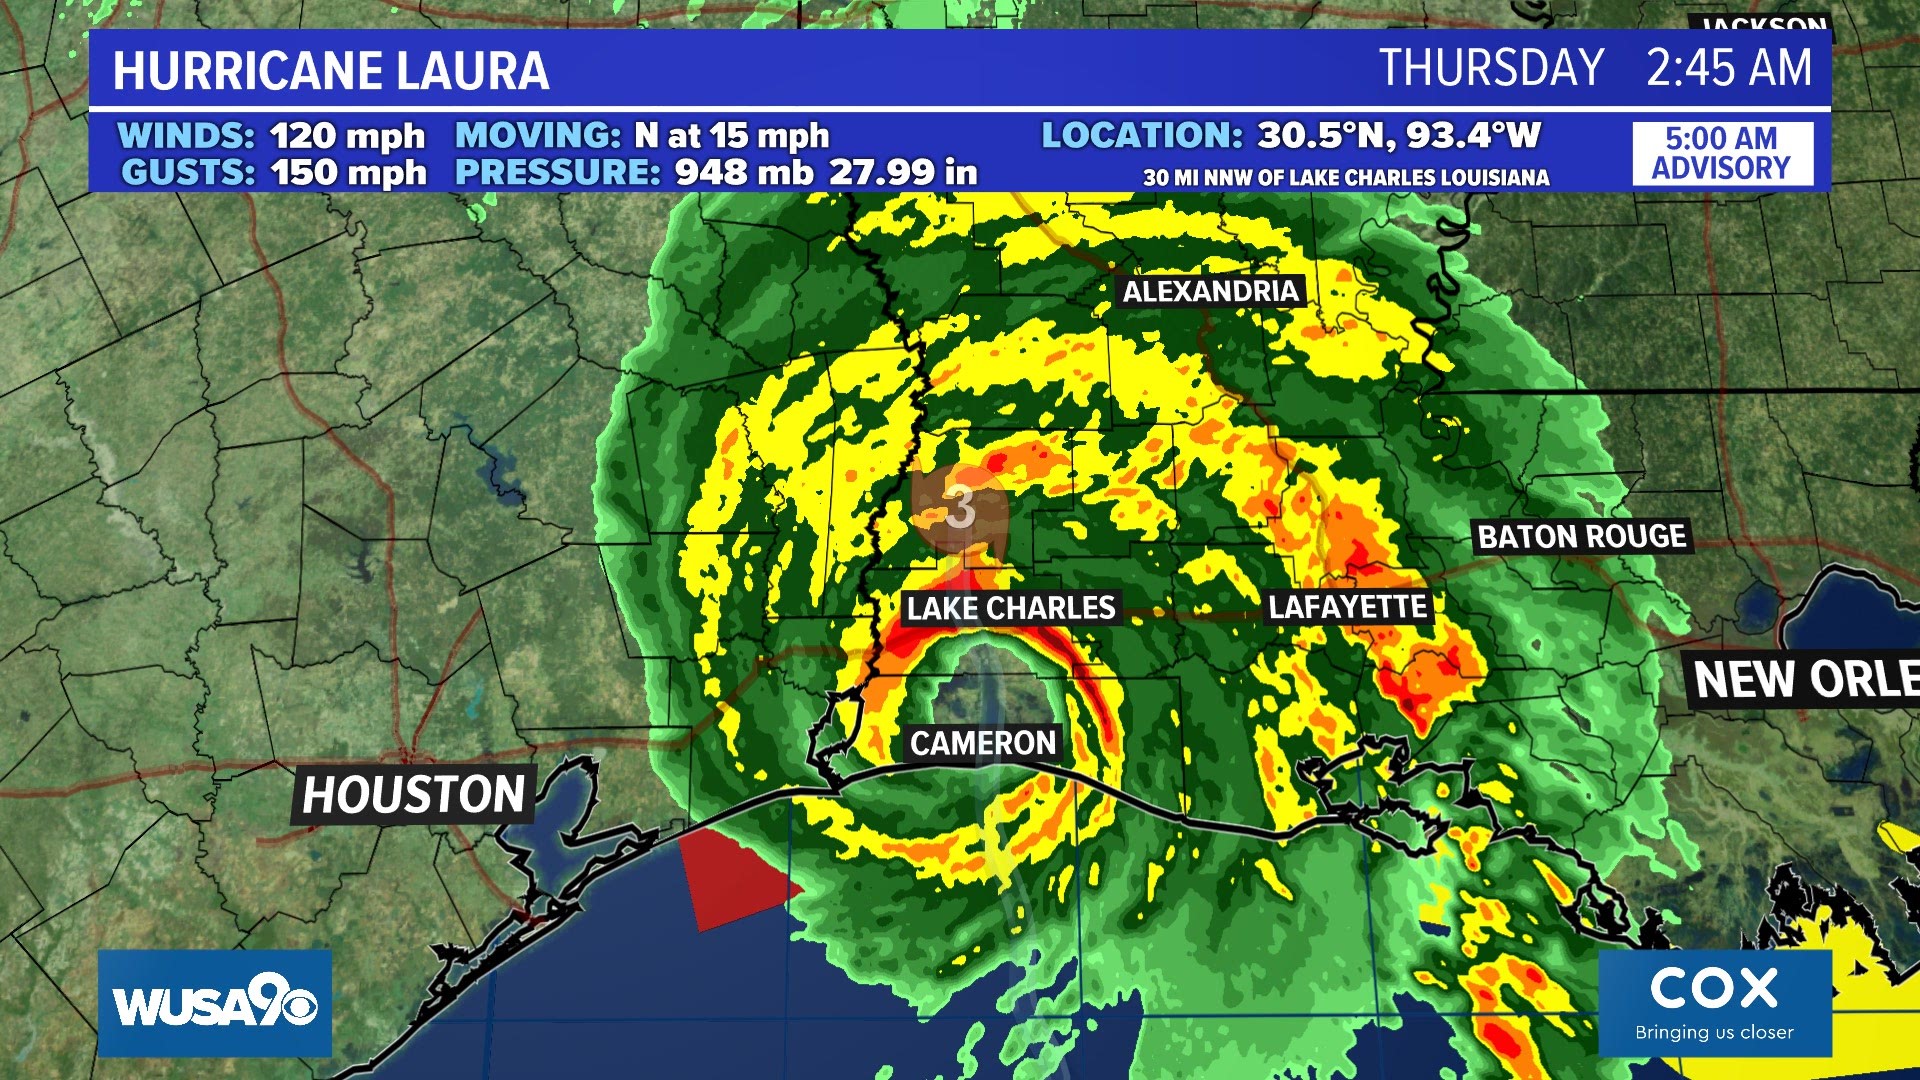 Radar imagery of Hurricane Laura as she made landfall shortly after 2 a.m. on Thu 8-27-2020.